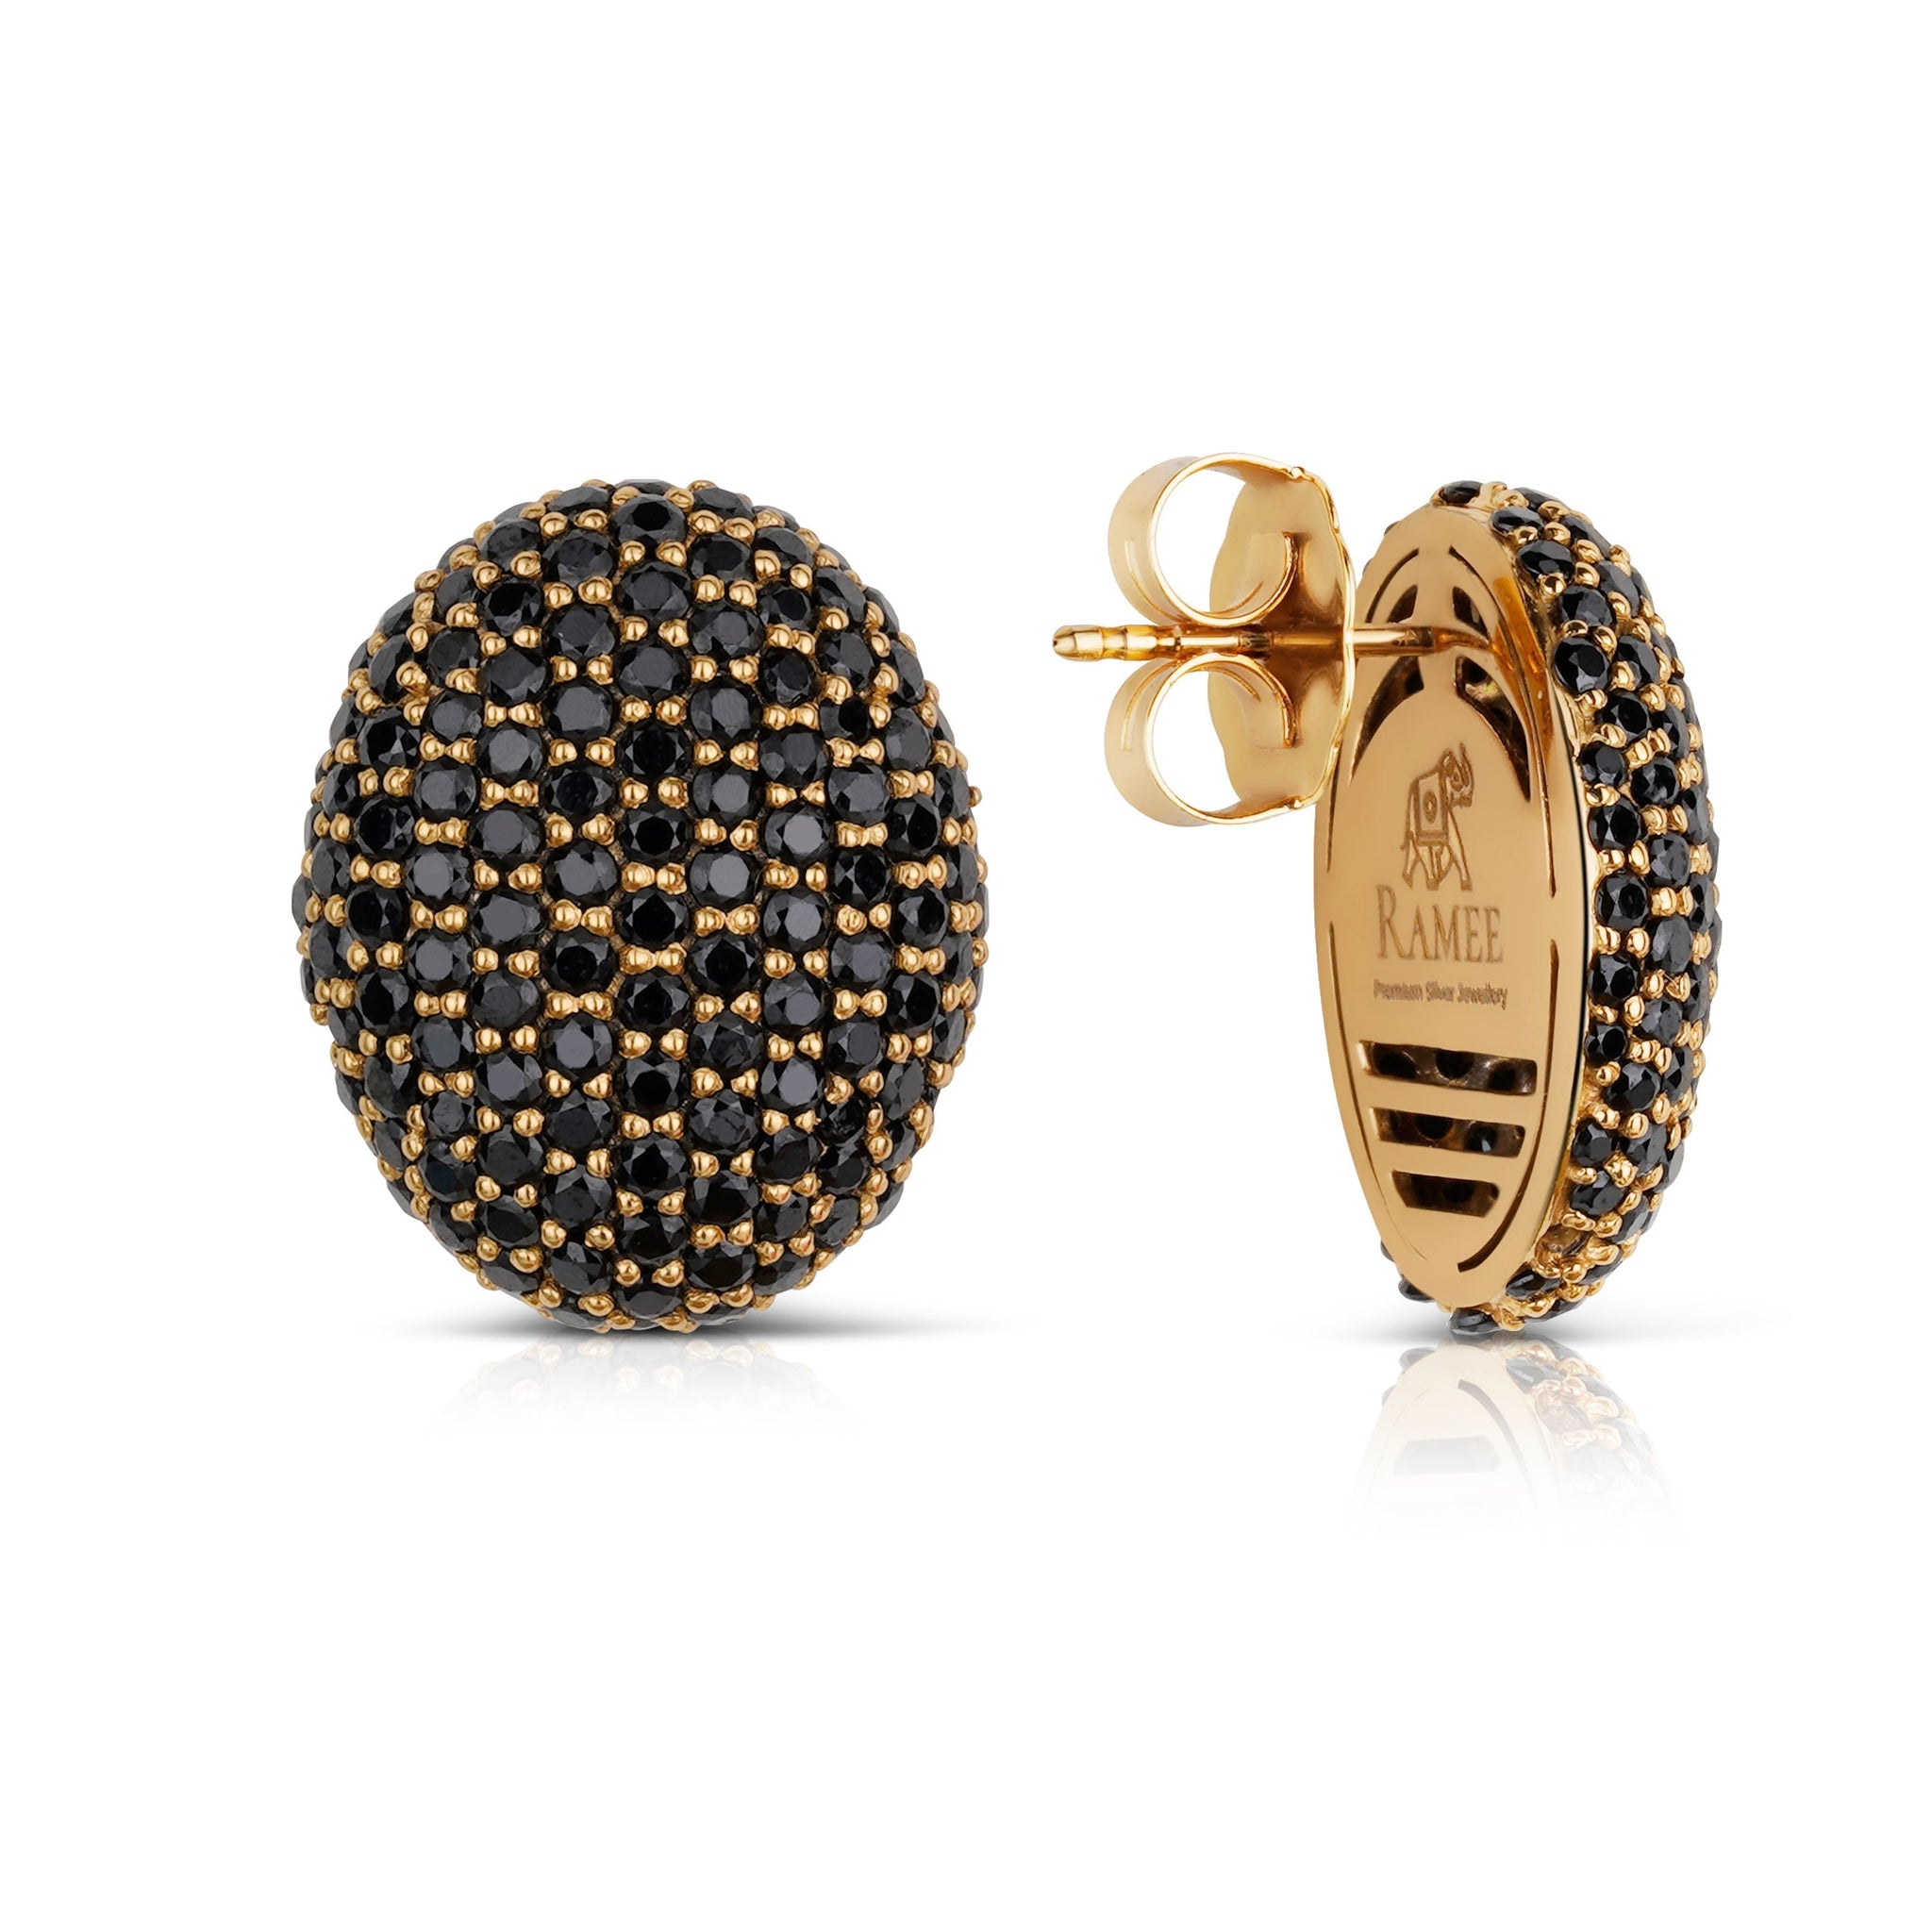 The Statement Earrings - Midnight Gold